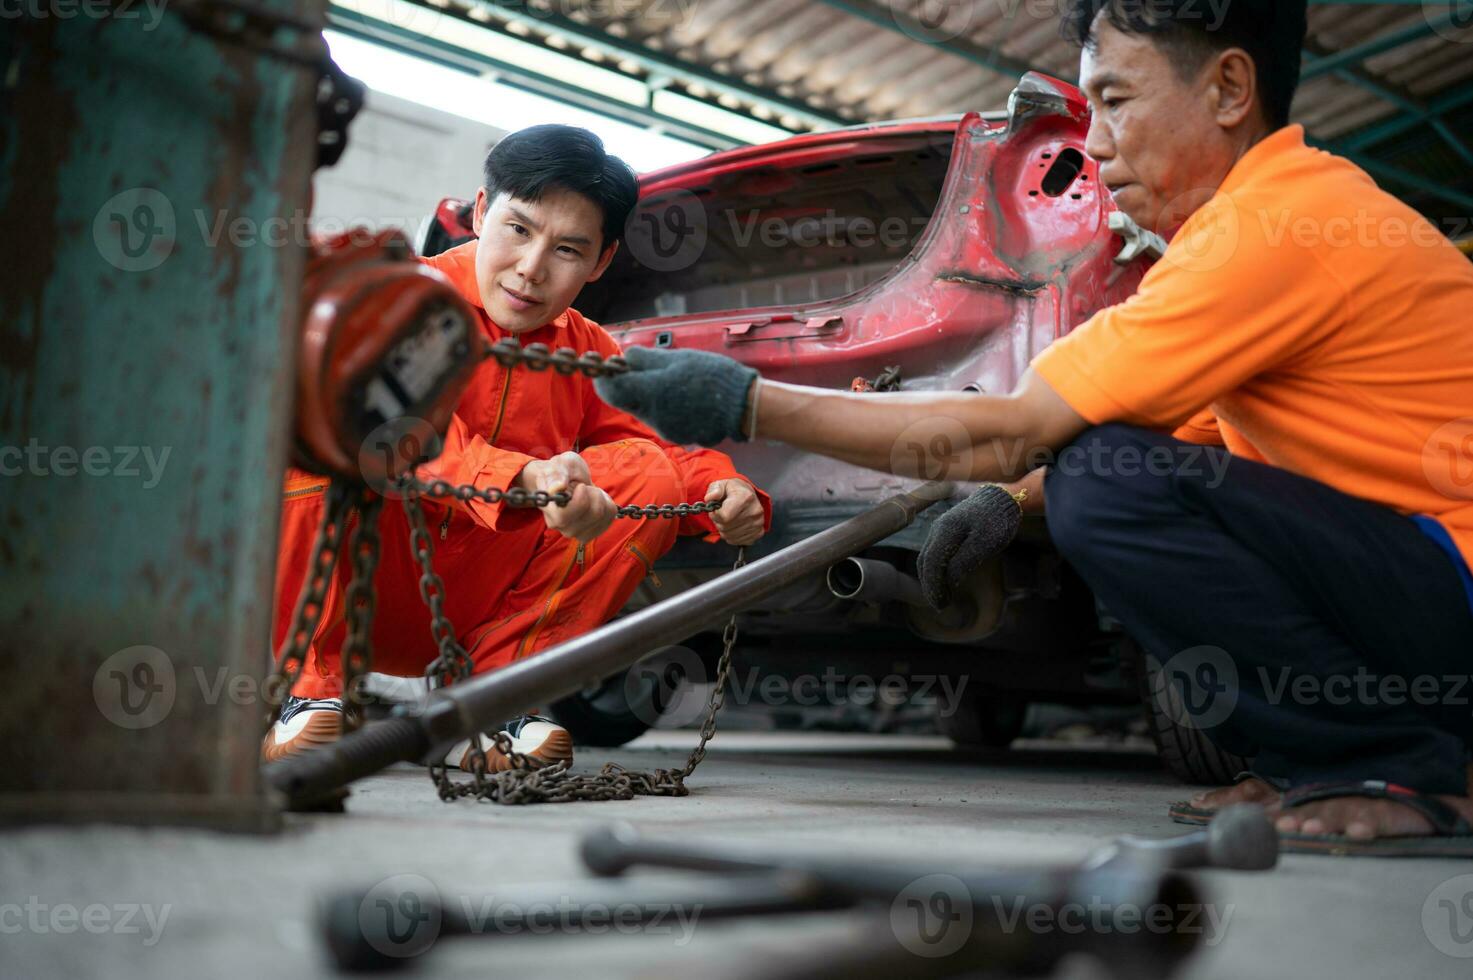 To return the automobile body to its former shape, an auto repair mechanic uses a machine to pull the car body caused by a heavy collision until it is deformed. photo